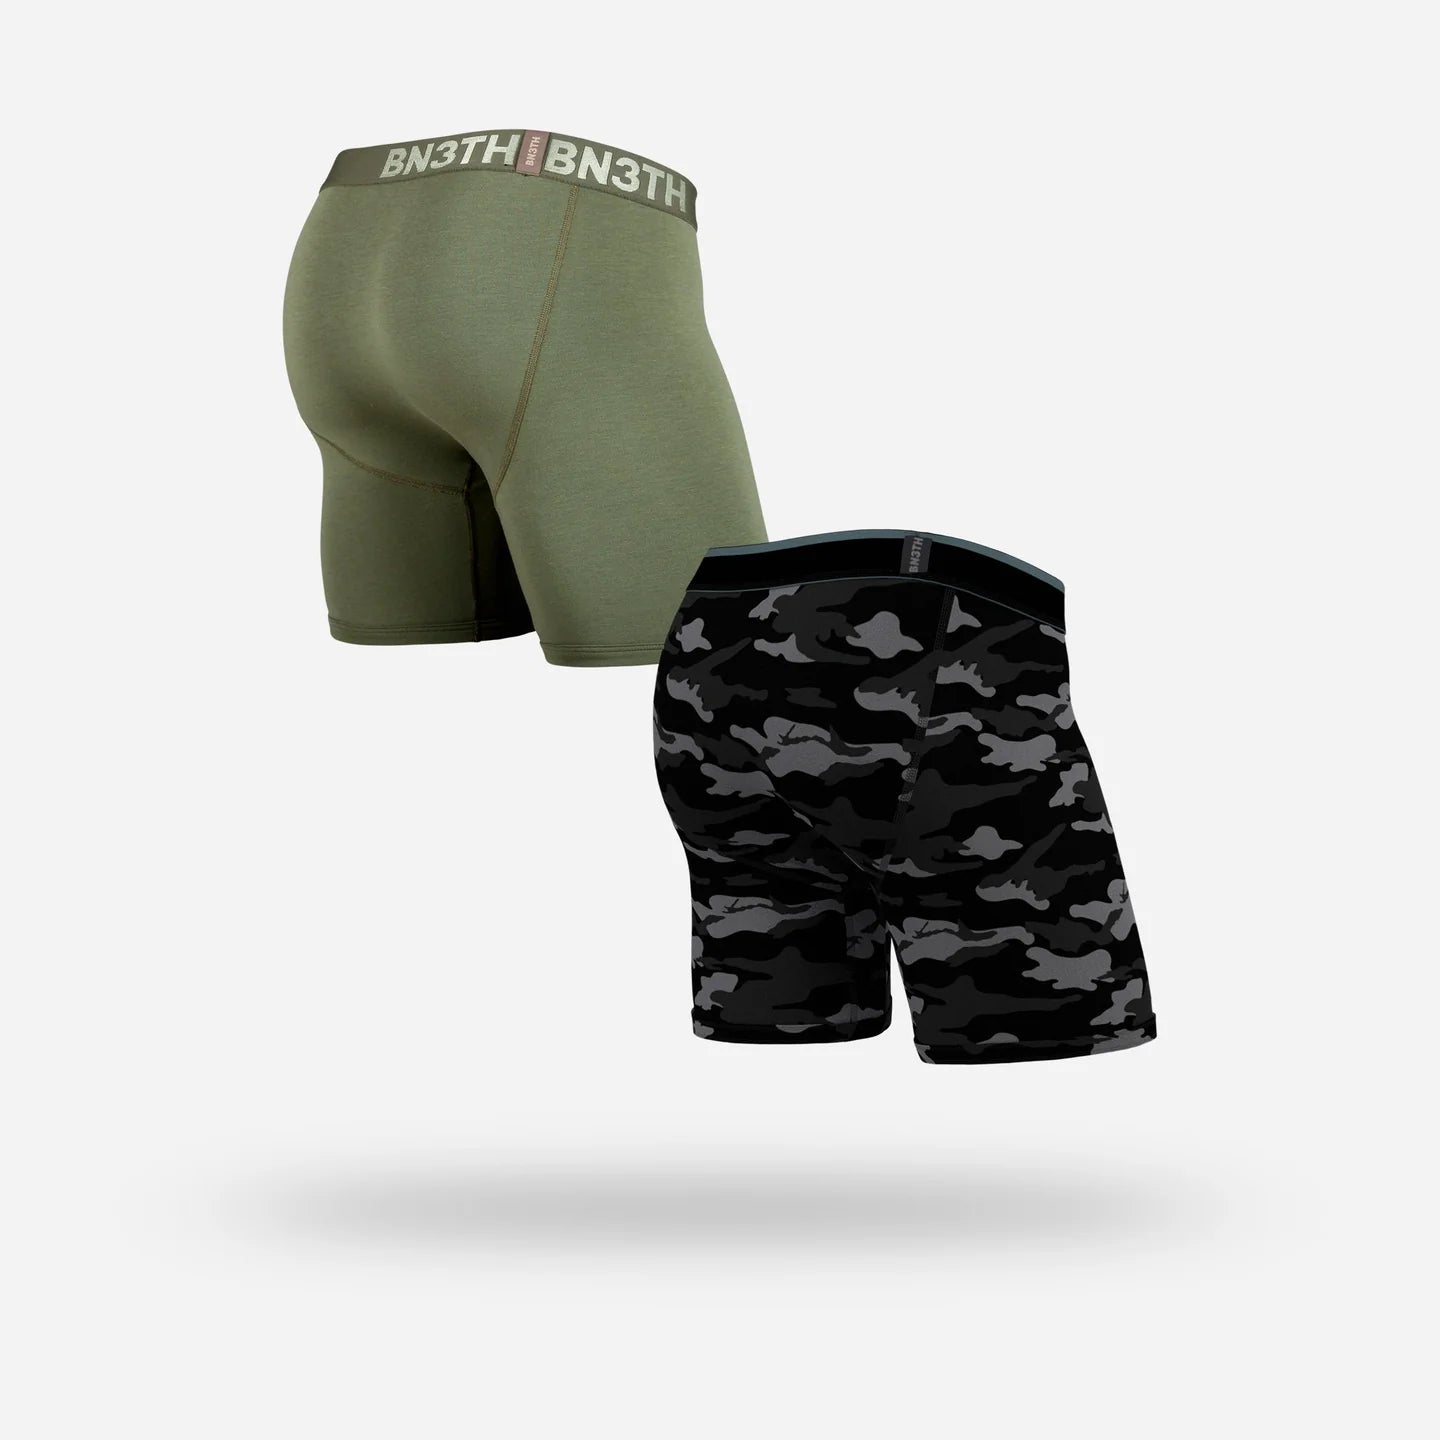 Bn3th - Classic Boxer Brief : Pine/Covert Camo 2 pack